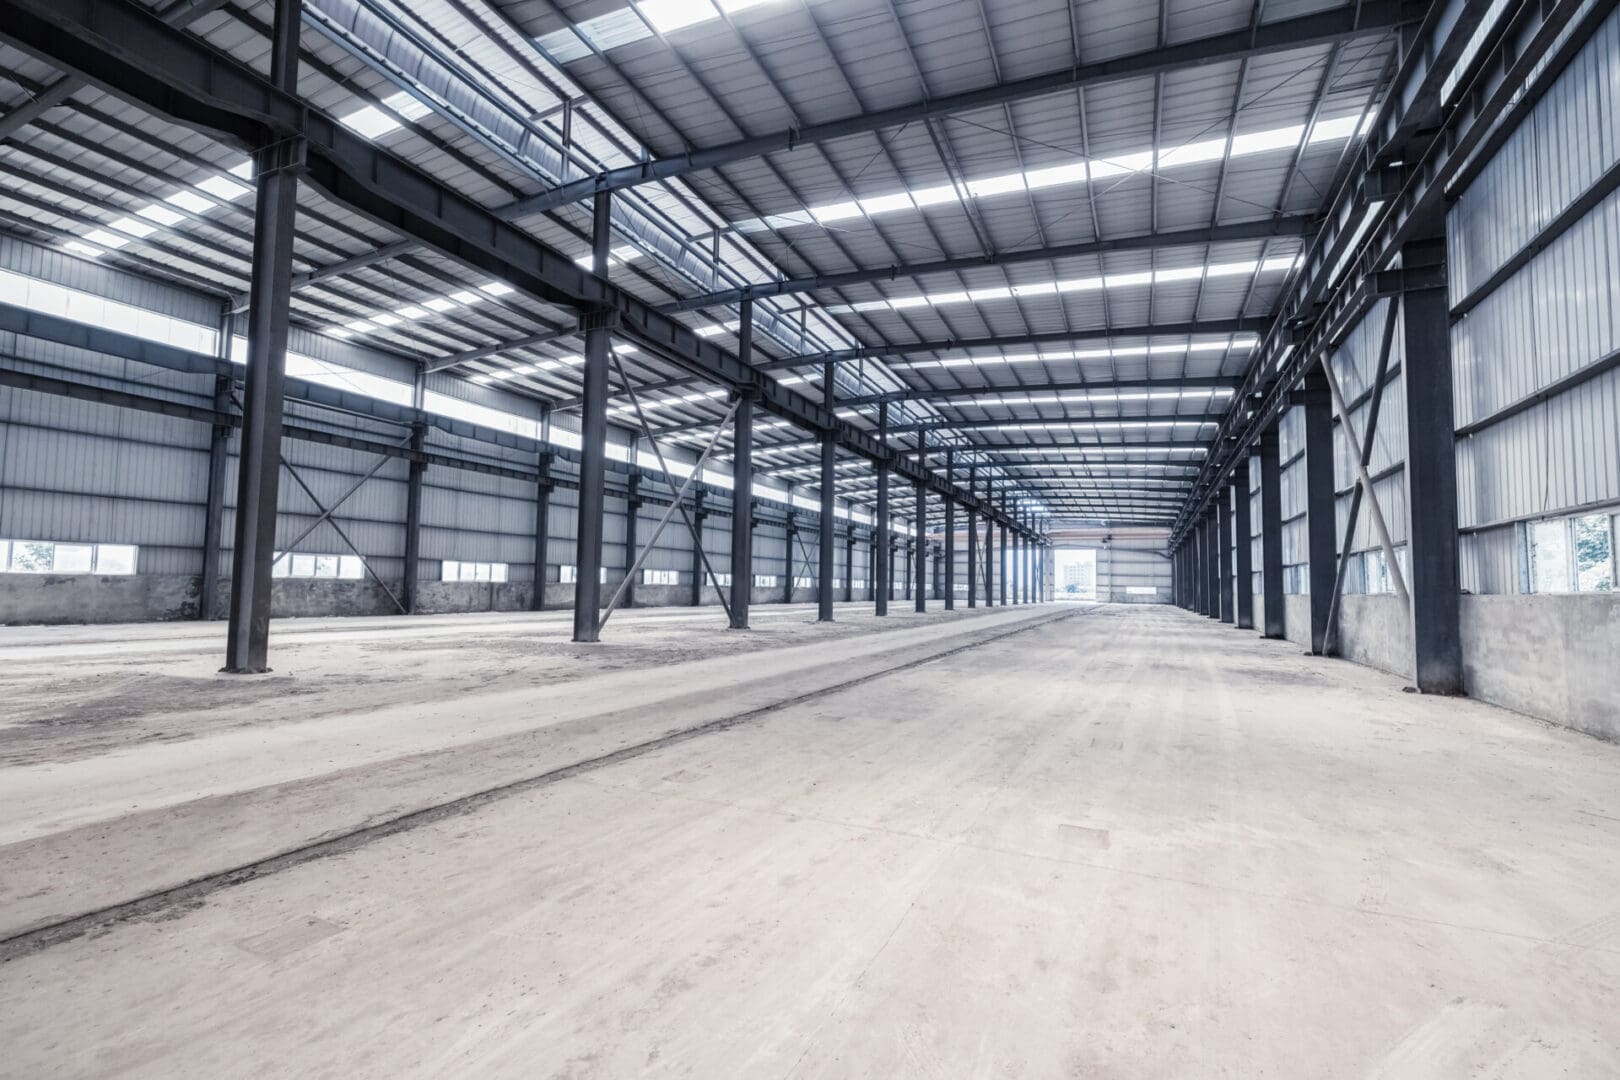 A large warehouse with many windows and lots of steel.